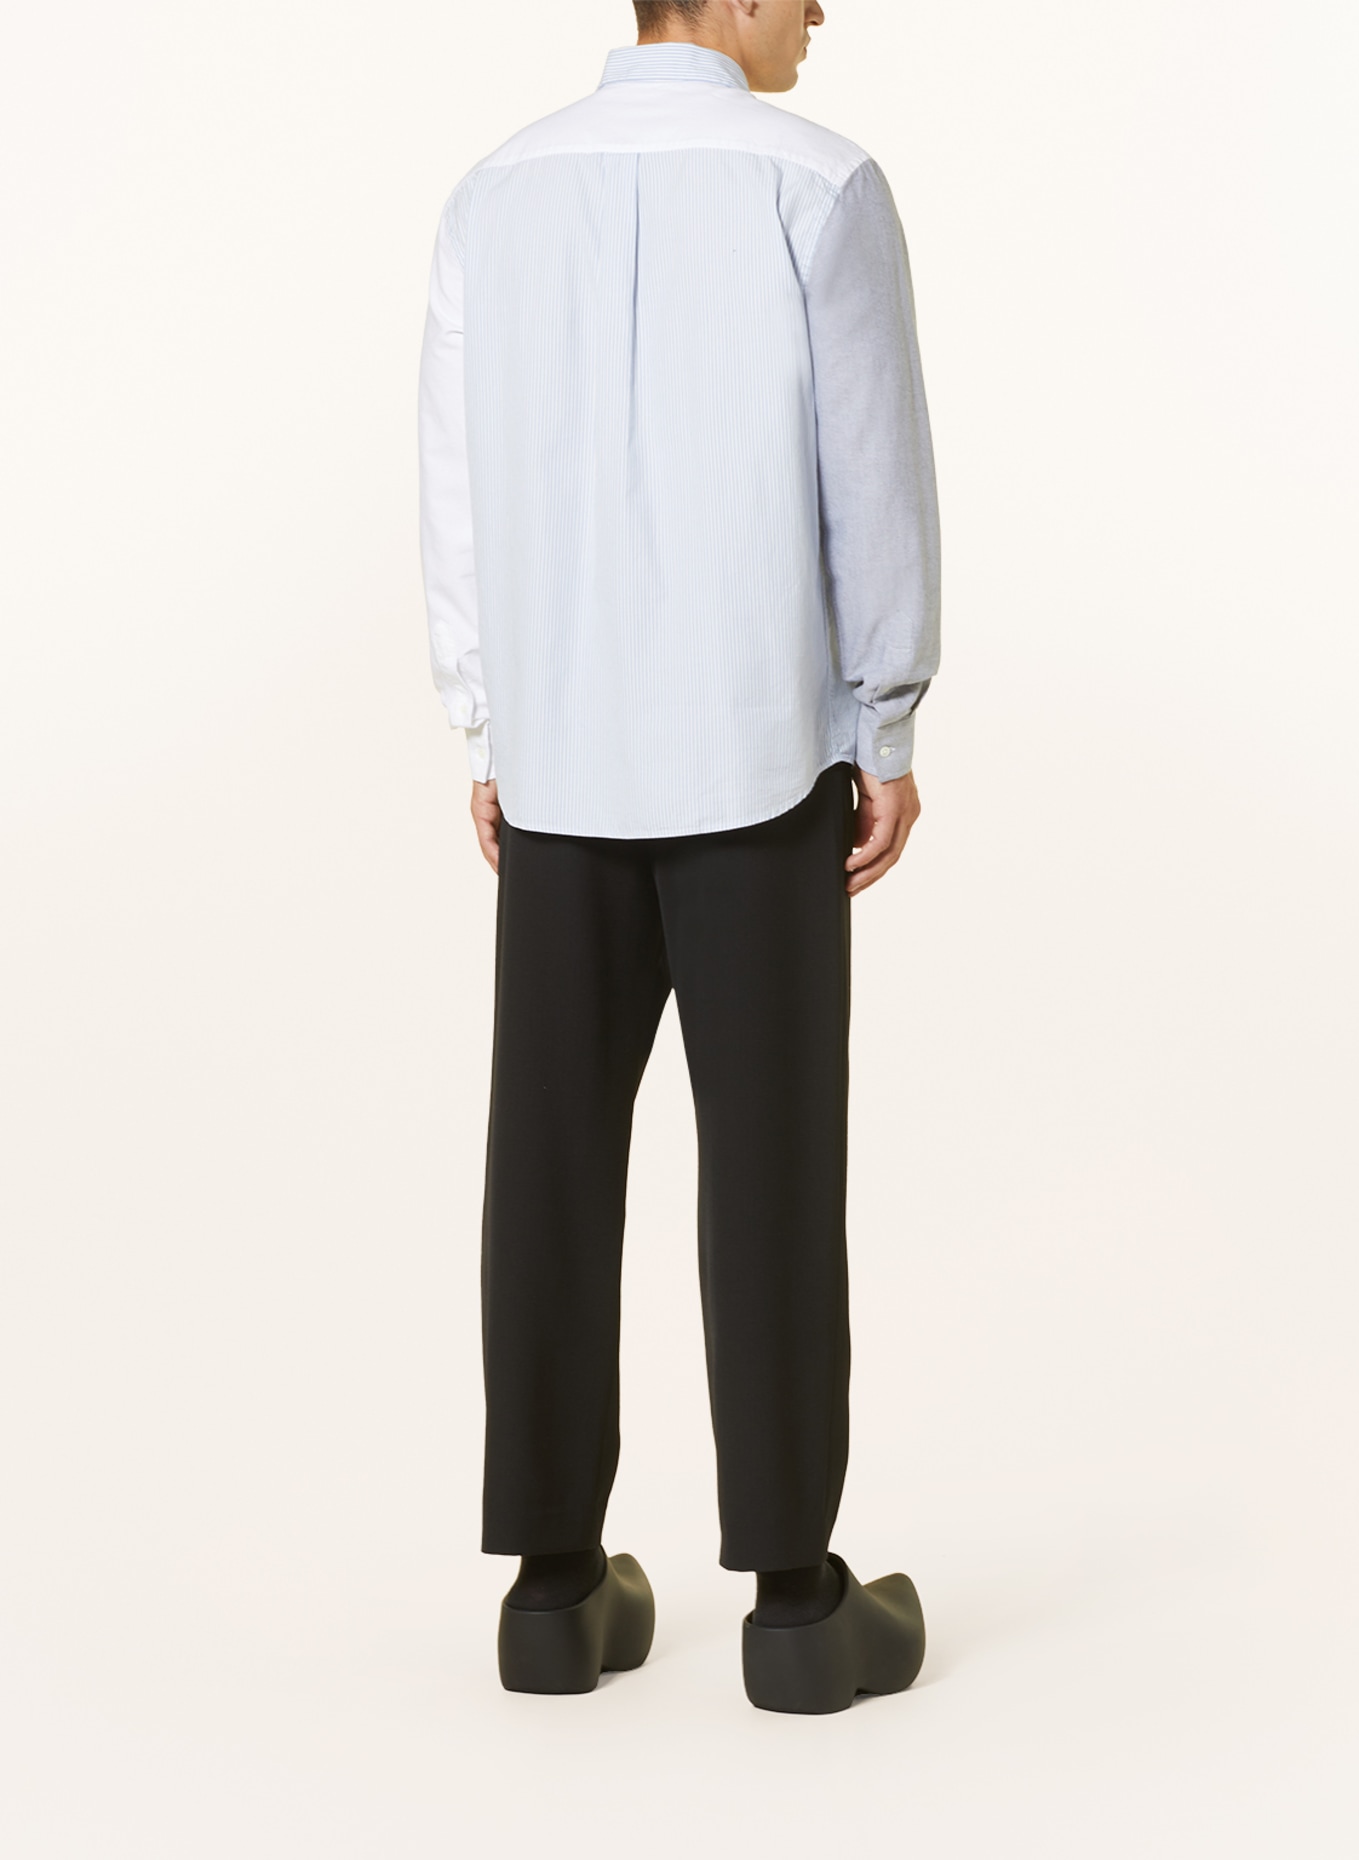 JW ANDERSON Shirt classic fit, Color: LIGHT BLUE/ GRAY/ WHITE (Image 3)